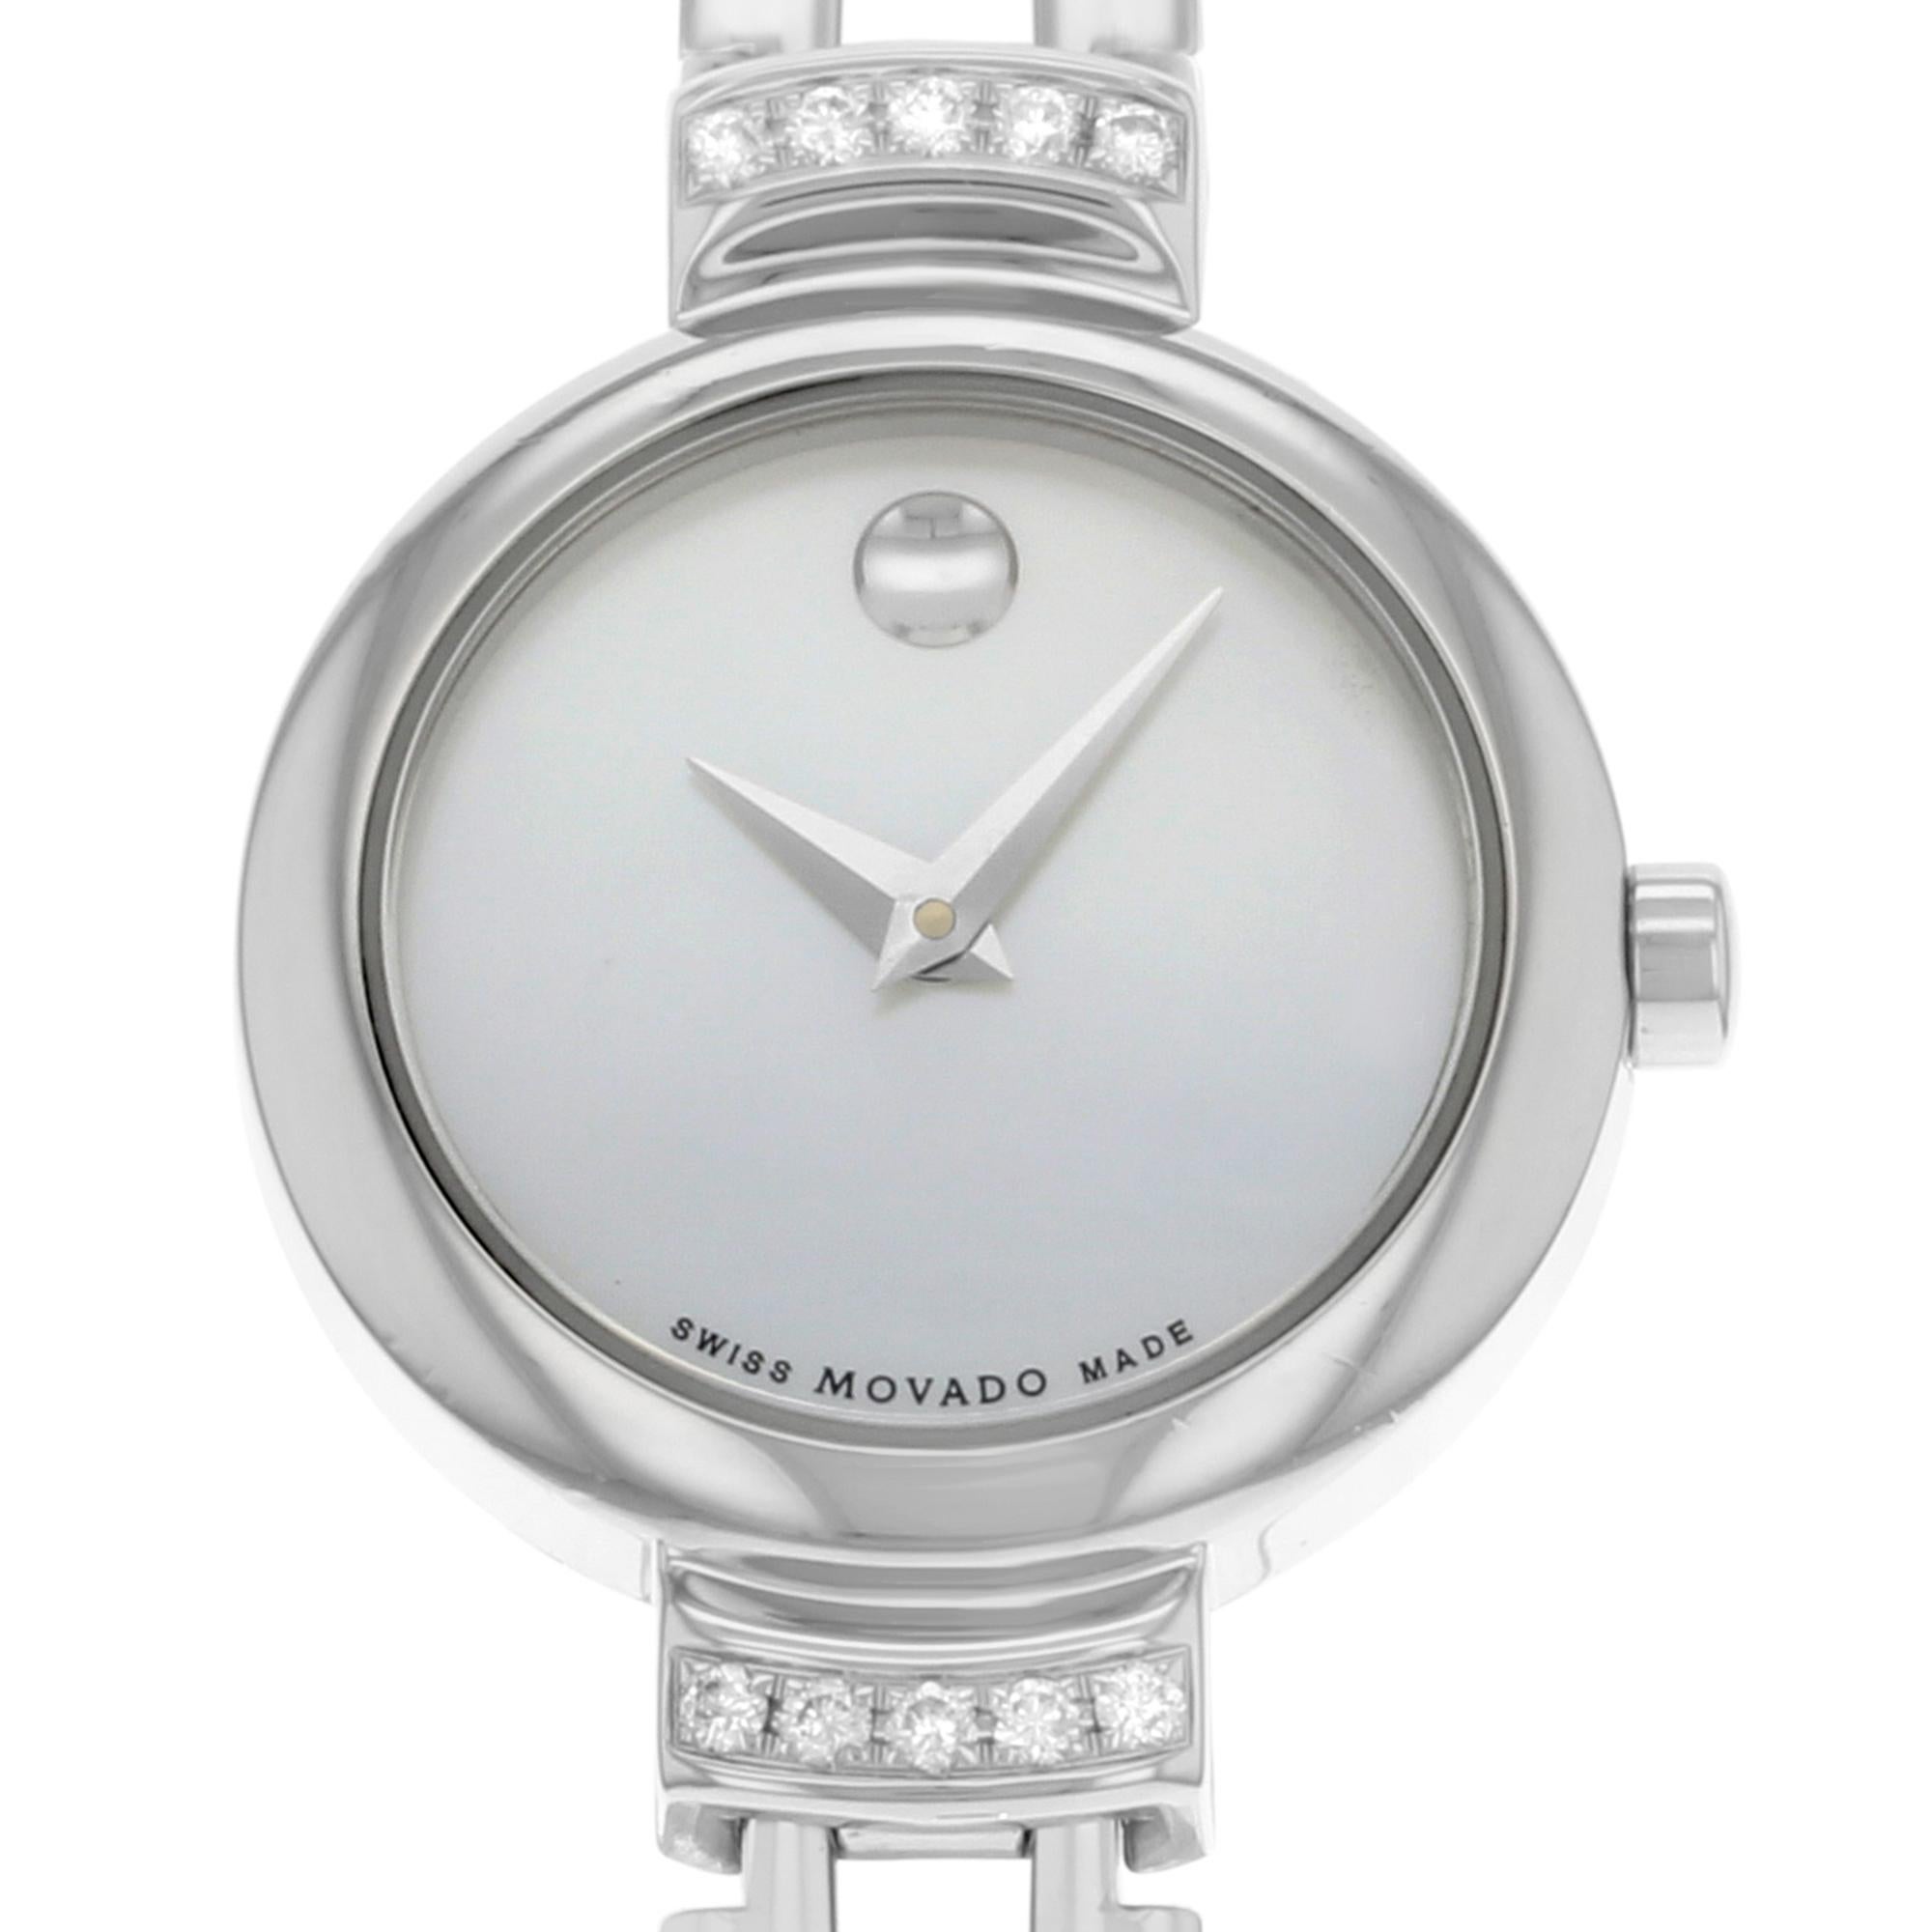 This display model Movado Harmony 0606353 is a beautiful Ladies timepiece that is powered by a quartz movement which is cased in a stainless steel case. It has a round shape face, diamonds dial and has hand unspecified style markers. It is completed